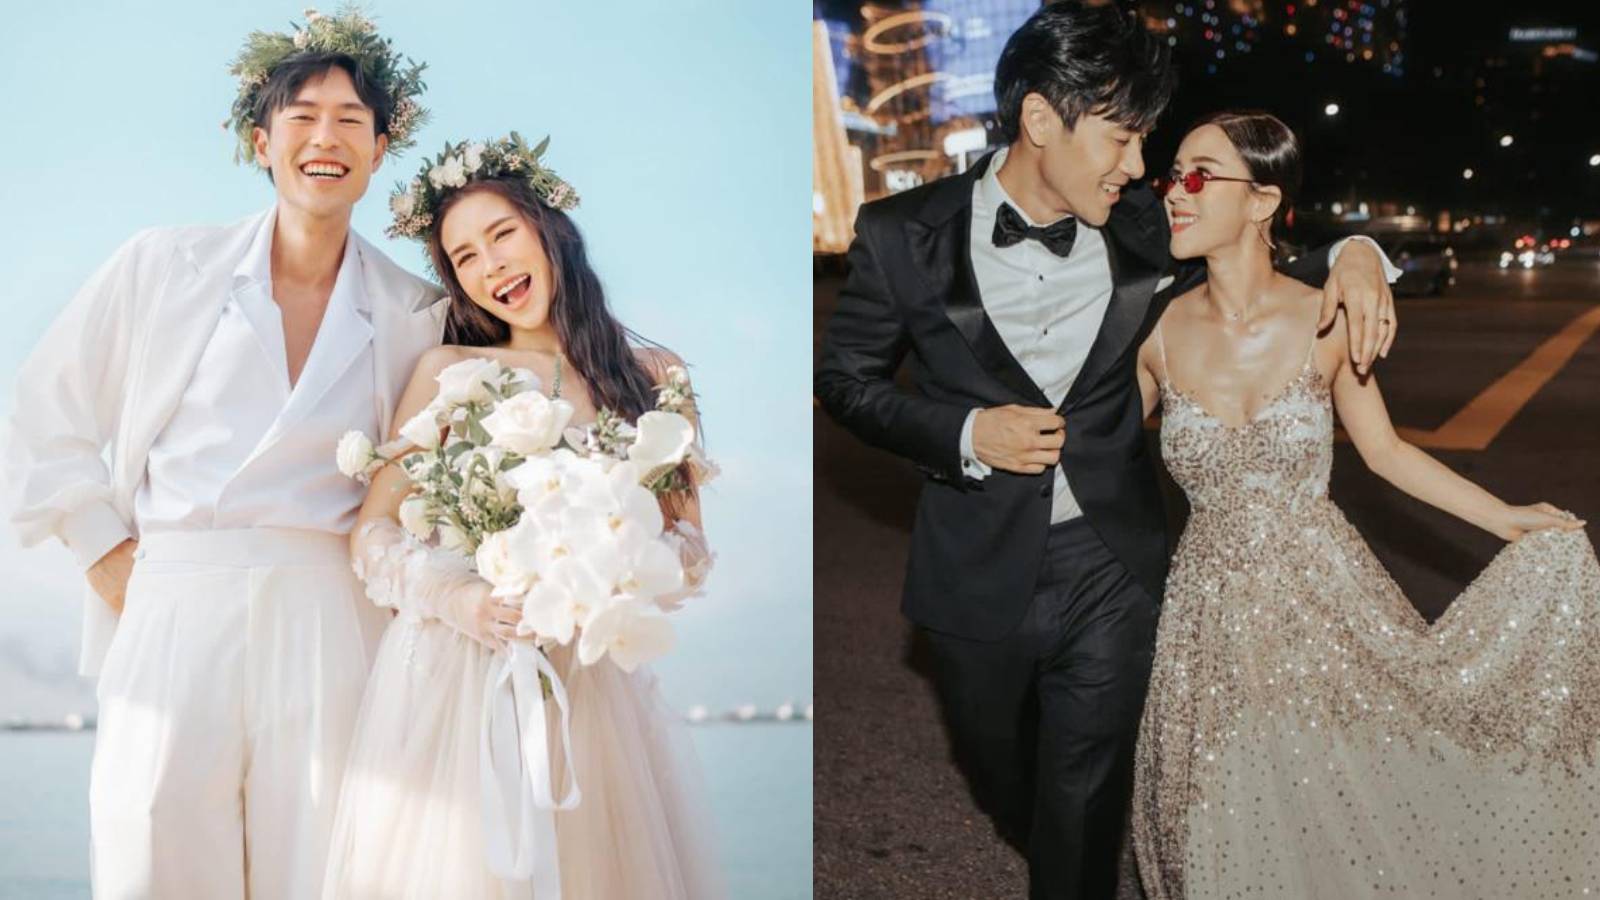 James Seah, 31, and Influencer Fiancée Nicole Chang Min, 29, Are Getting Married On Jan 15